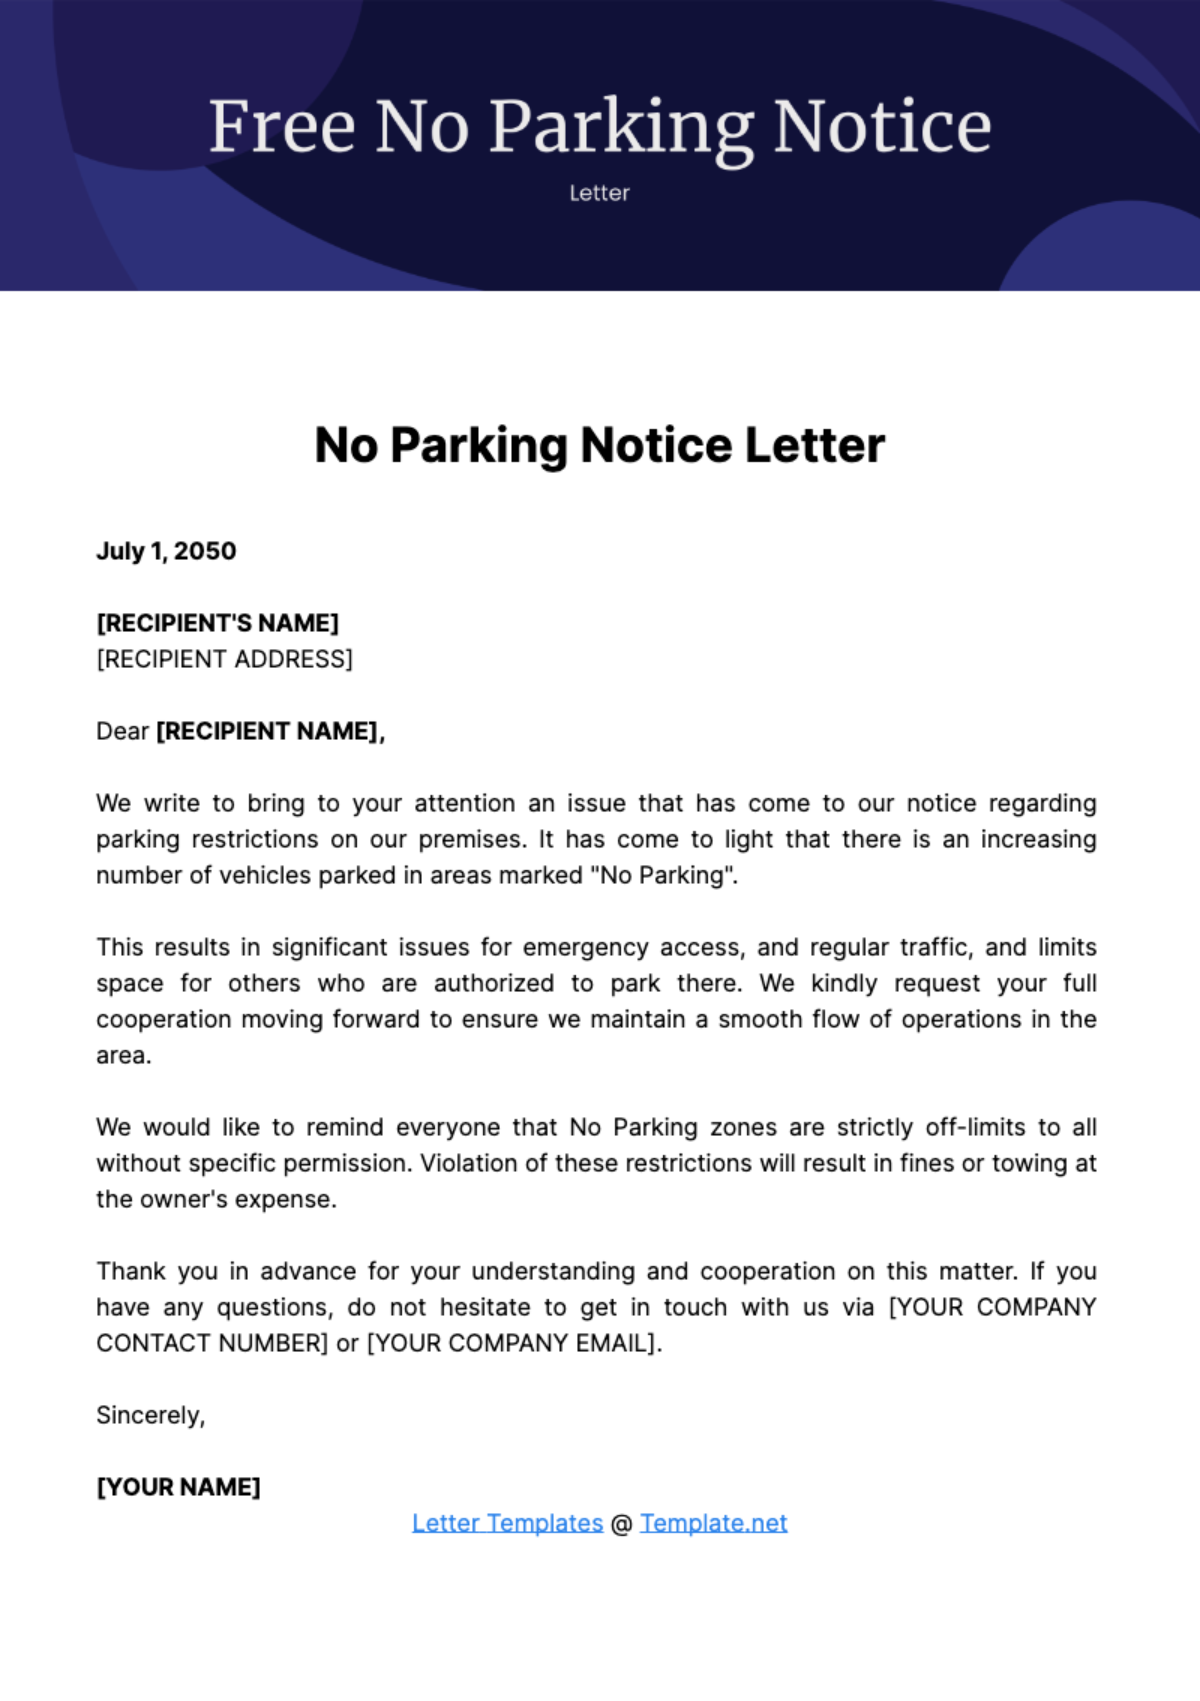 Free No Parking Notice Letter Template